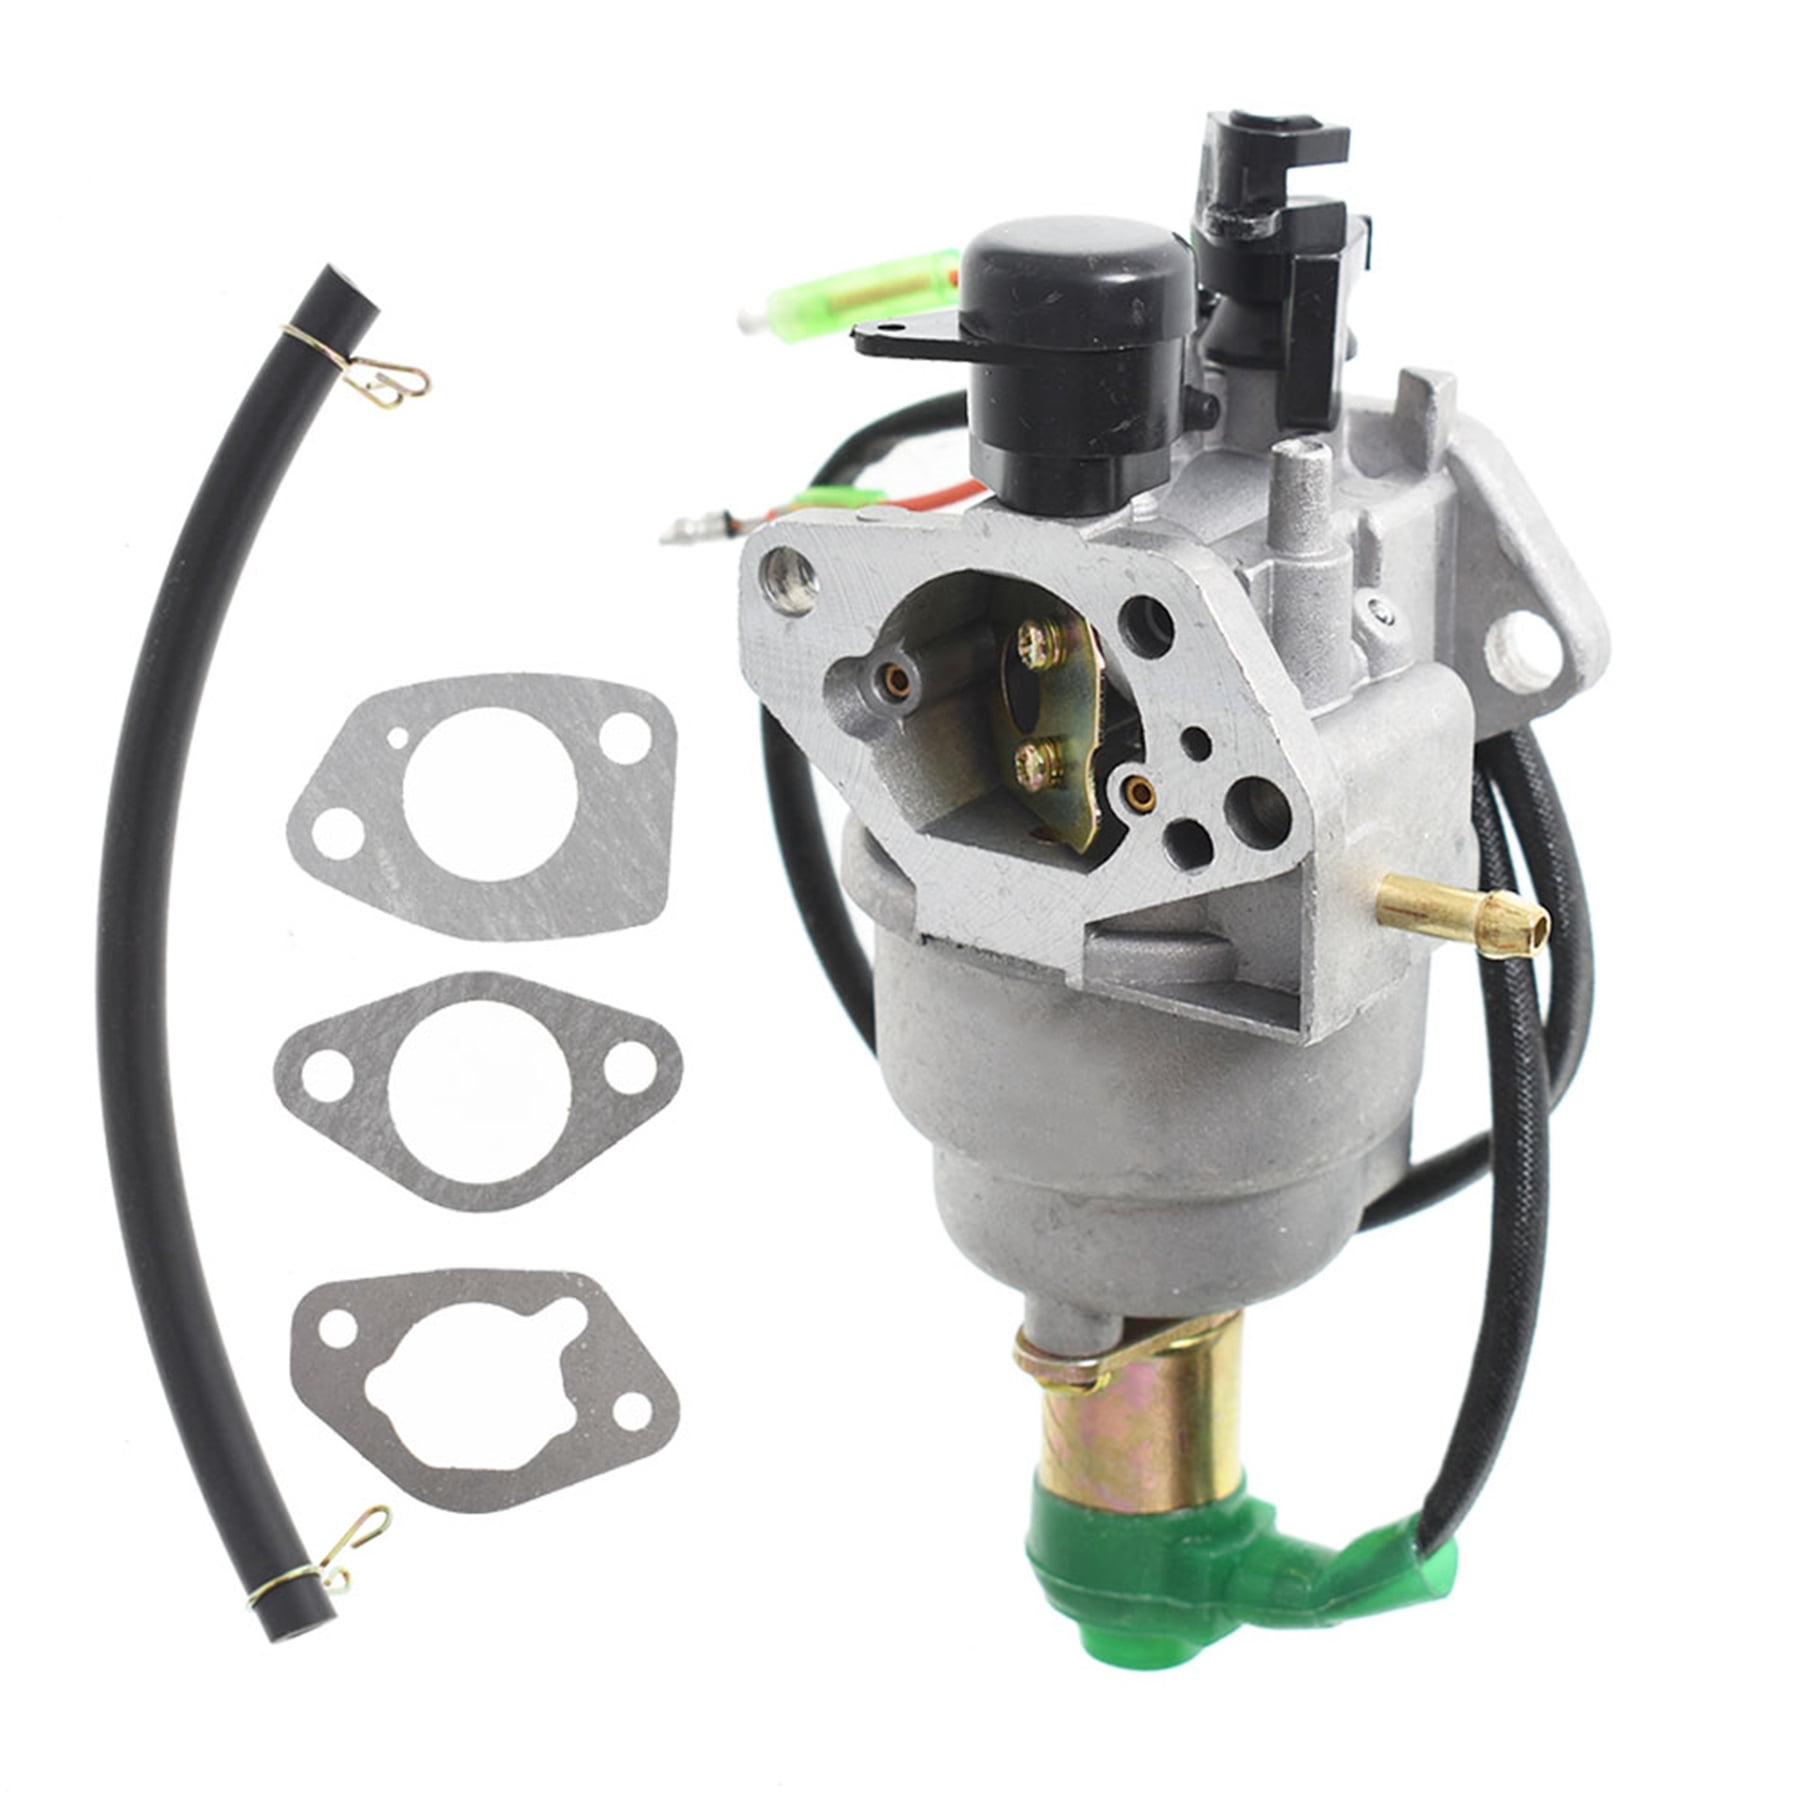 Replacement Carburettor Carb Compatible With Honda GX340 Engine 